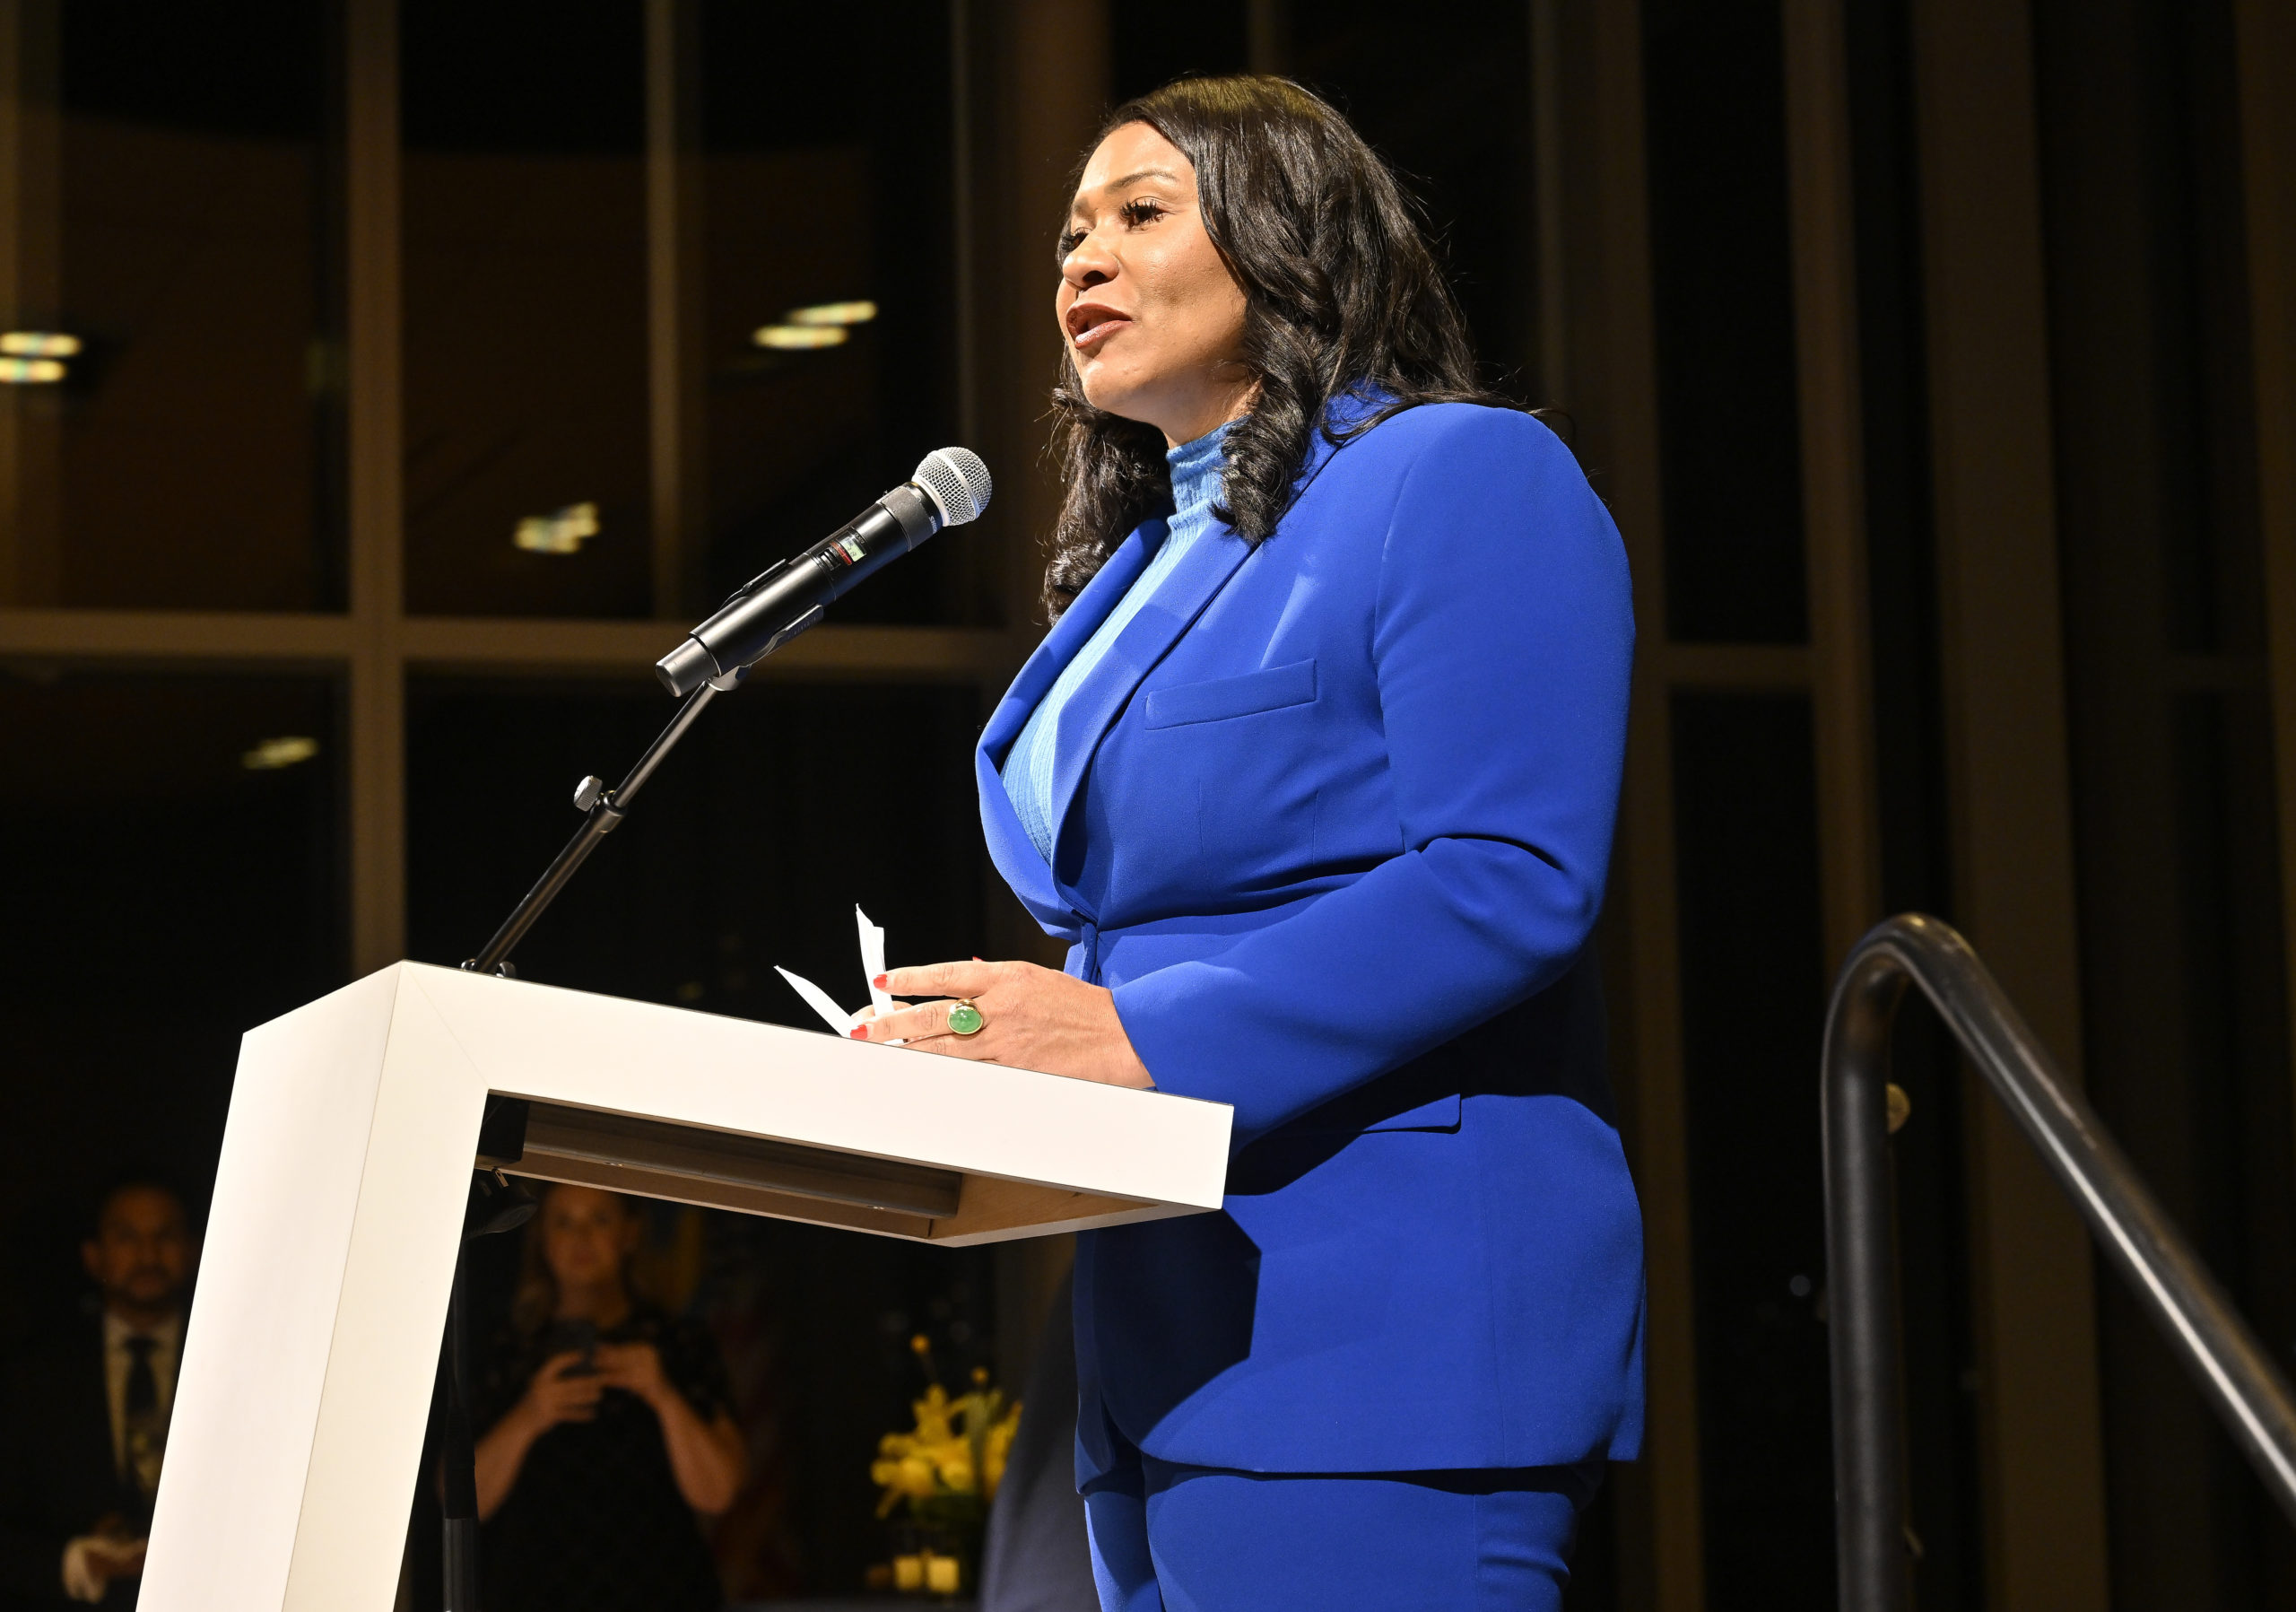 VARIOUS CITIES - FEBRUARY 20: London Breed, Mayor of San Francisco speaks onstage during the Inaugural Reception of the New Consulate General of Sweden in San Francisco at the San Francisco Conservatory of Music on February 20, 2024 in San Francisco, California. (Photo by Steve Jennings/Getty Images)